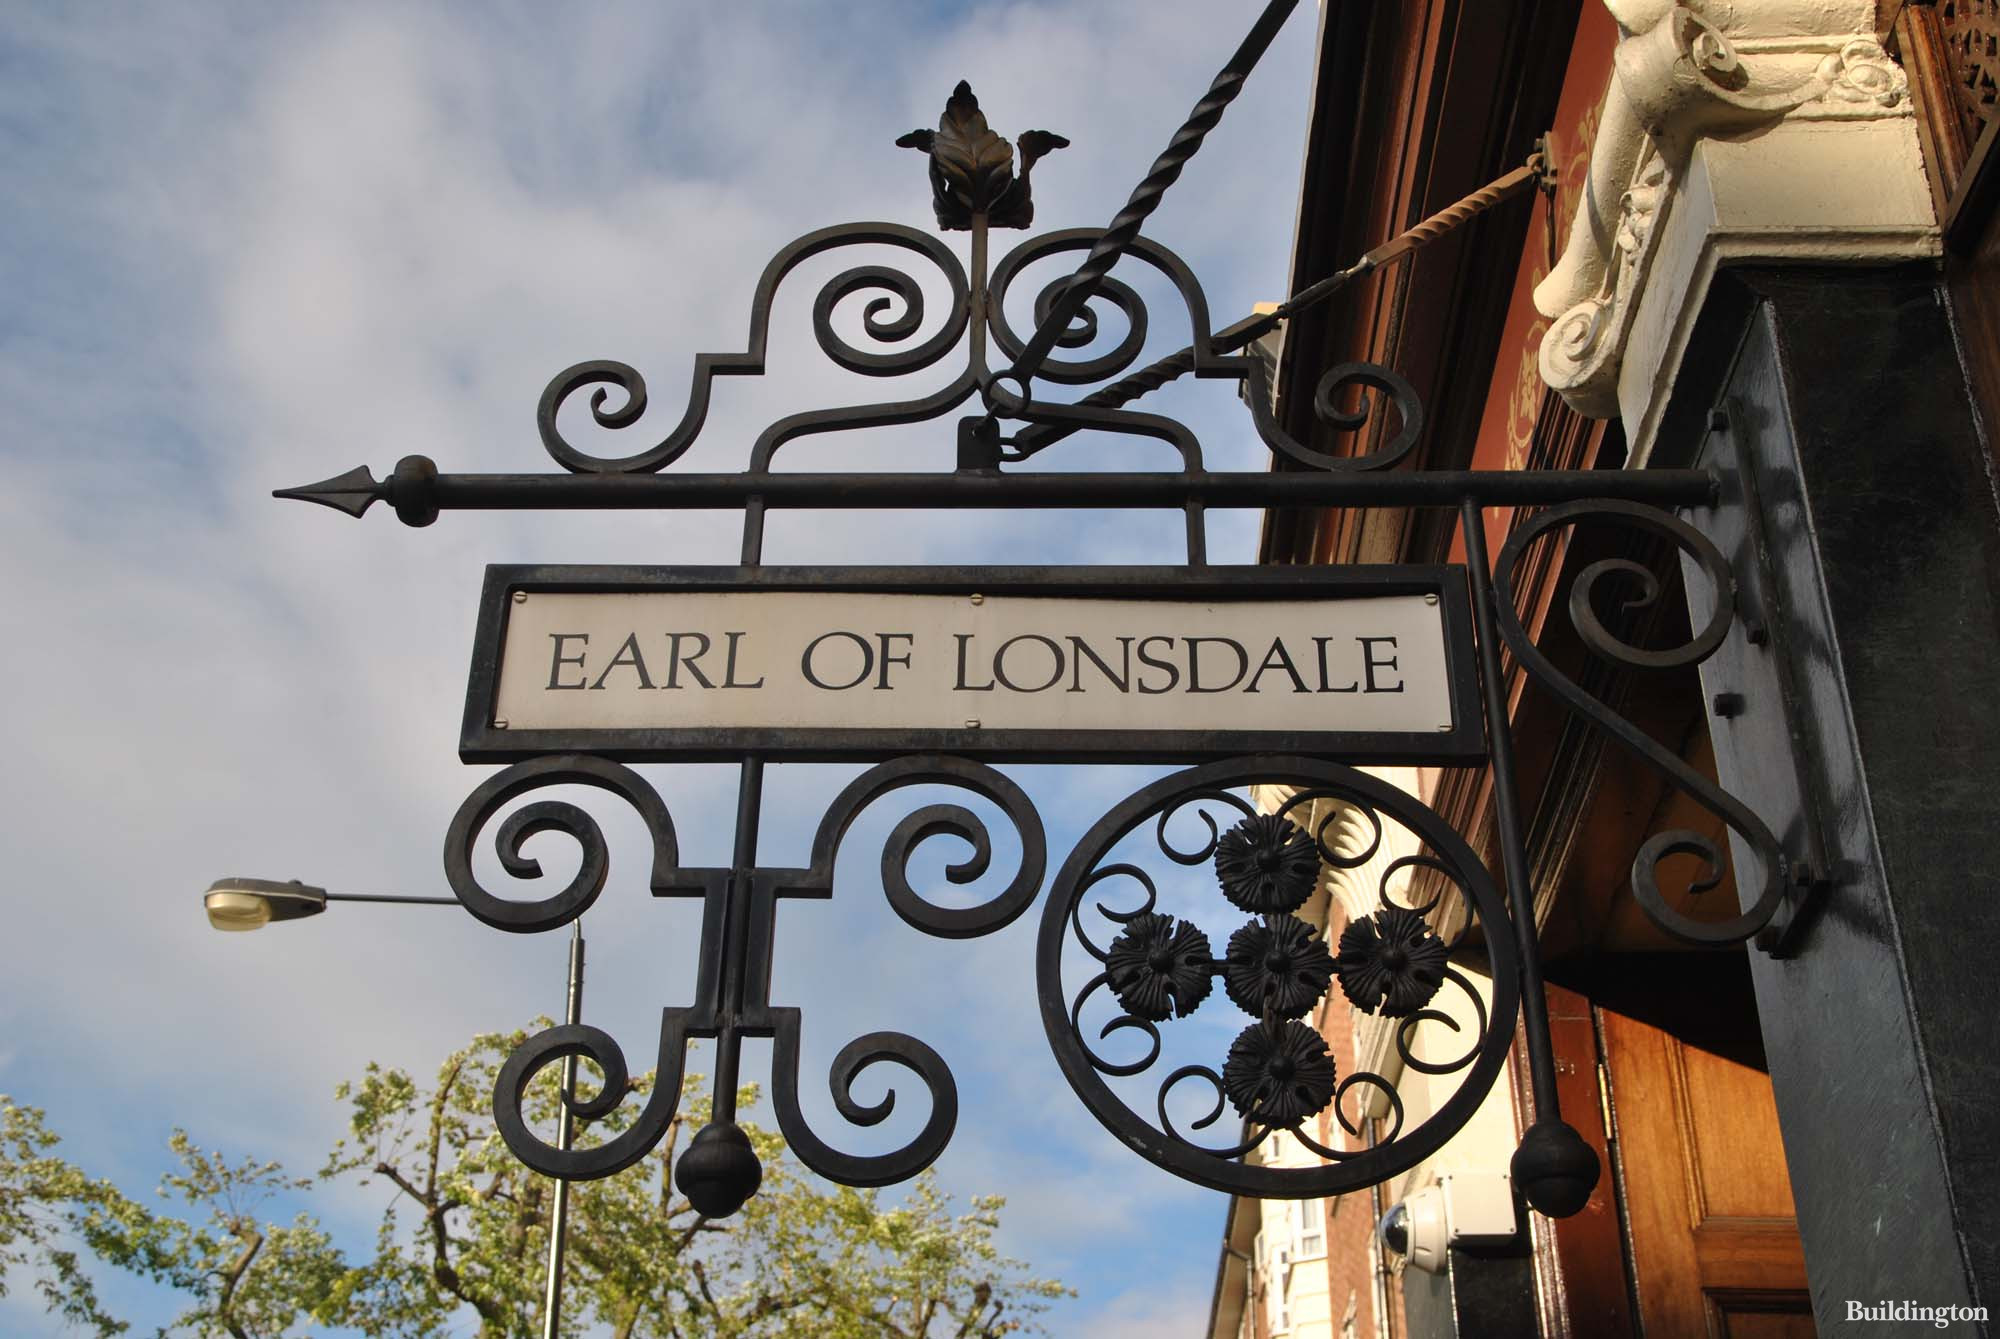 Earl of Lonsdale pub sign in Notting Hill, London W11.